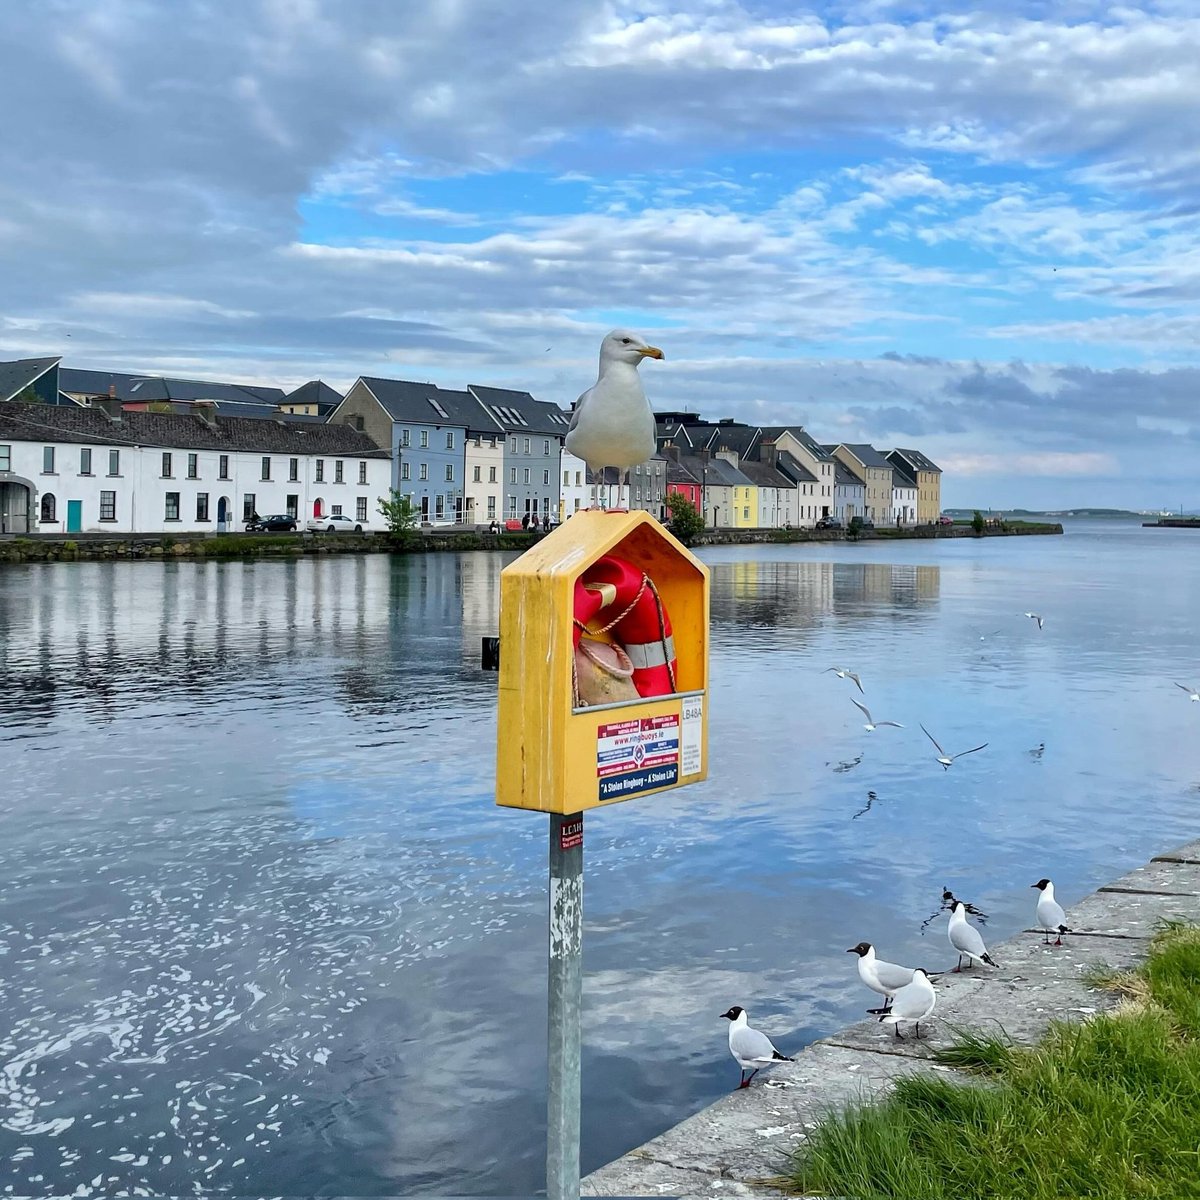 That iconic view... ain't never seen nothing like a Galway Gull 🎶😁💯☀️💙

📸 IG/ hokusfokus.fotos
📍 Claddagh, Galway

#GalwayGull #Iconic #LongWalk #Claddagh #Galway #Ireland #VisitGalway